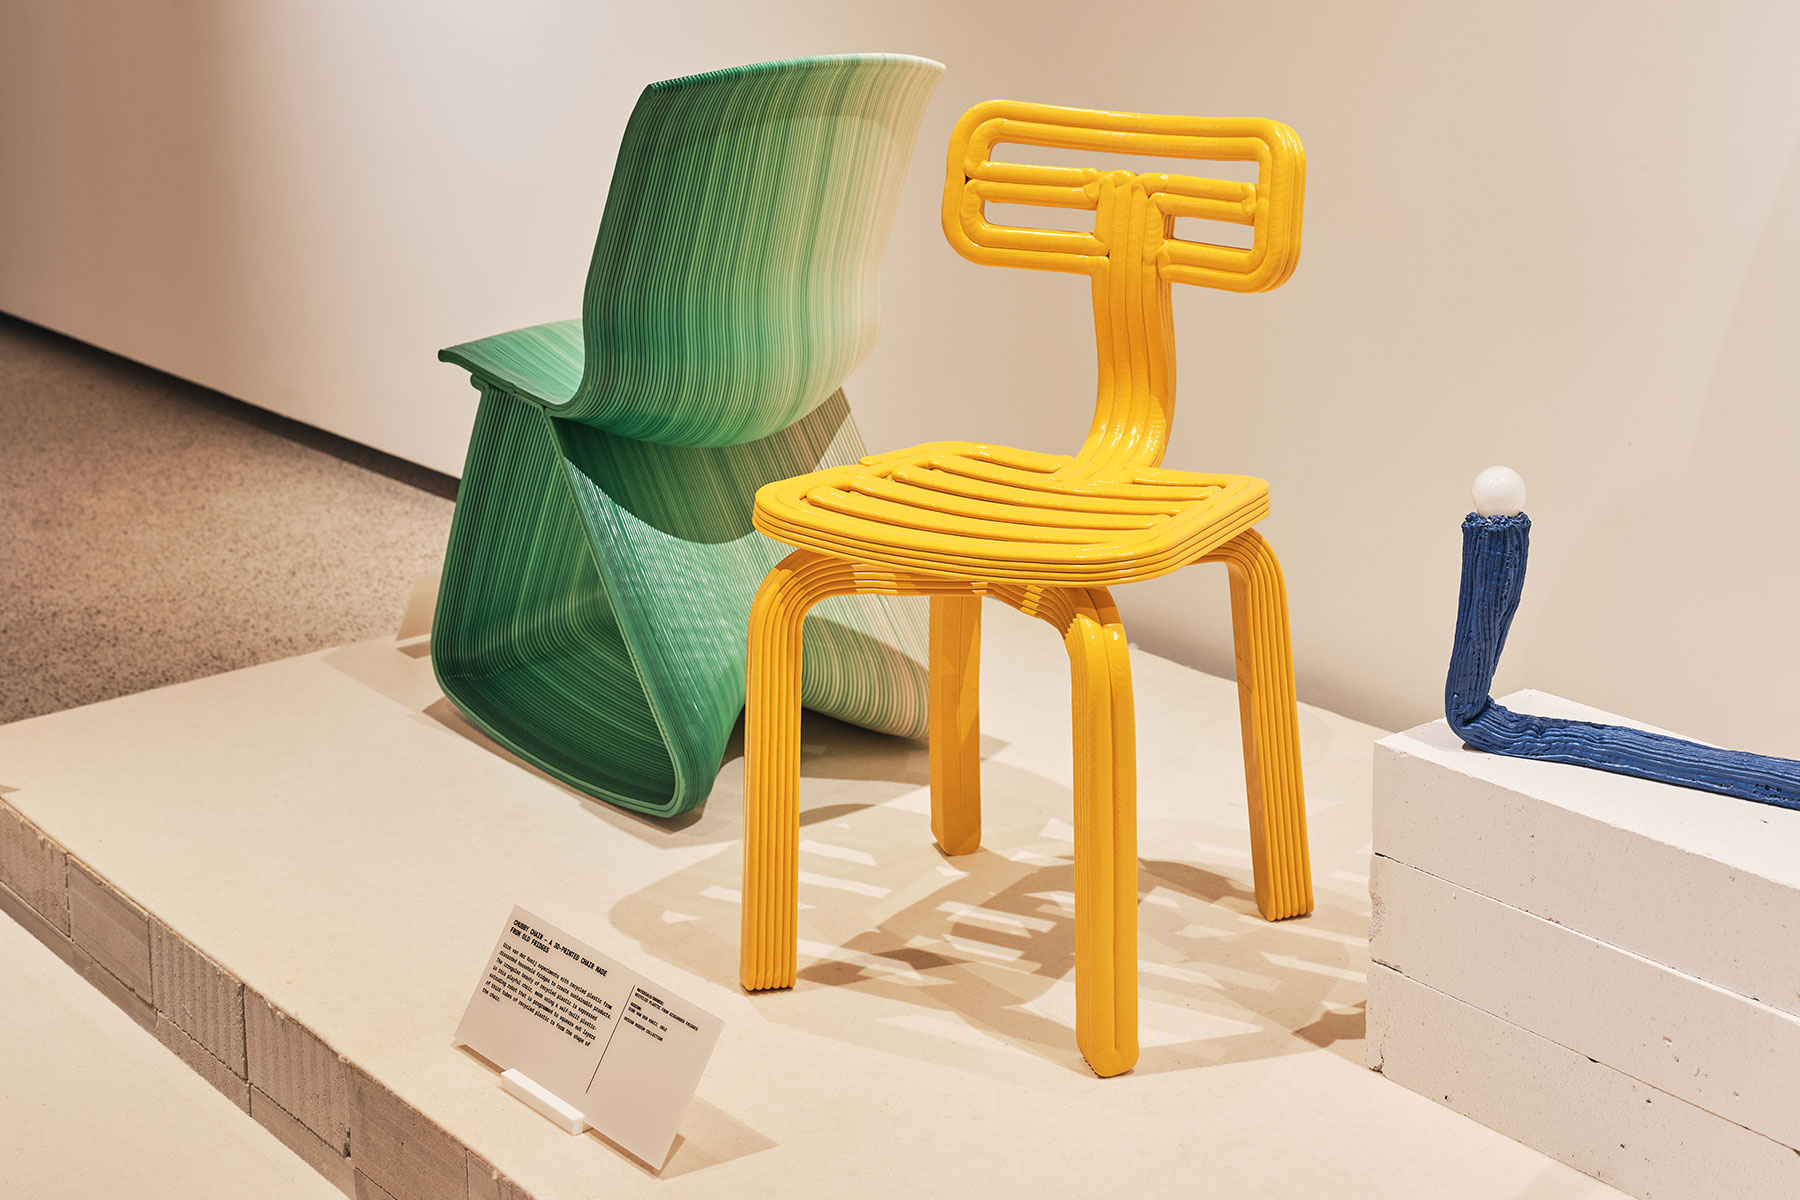 Chair made from recylced waste